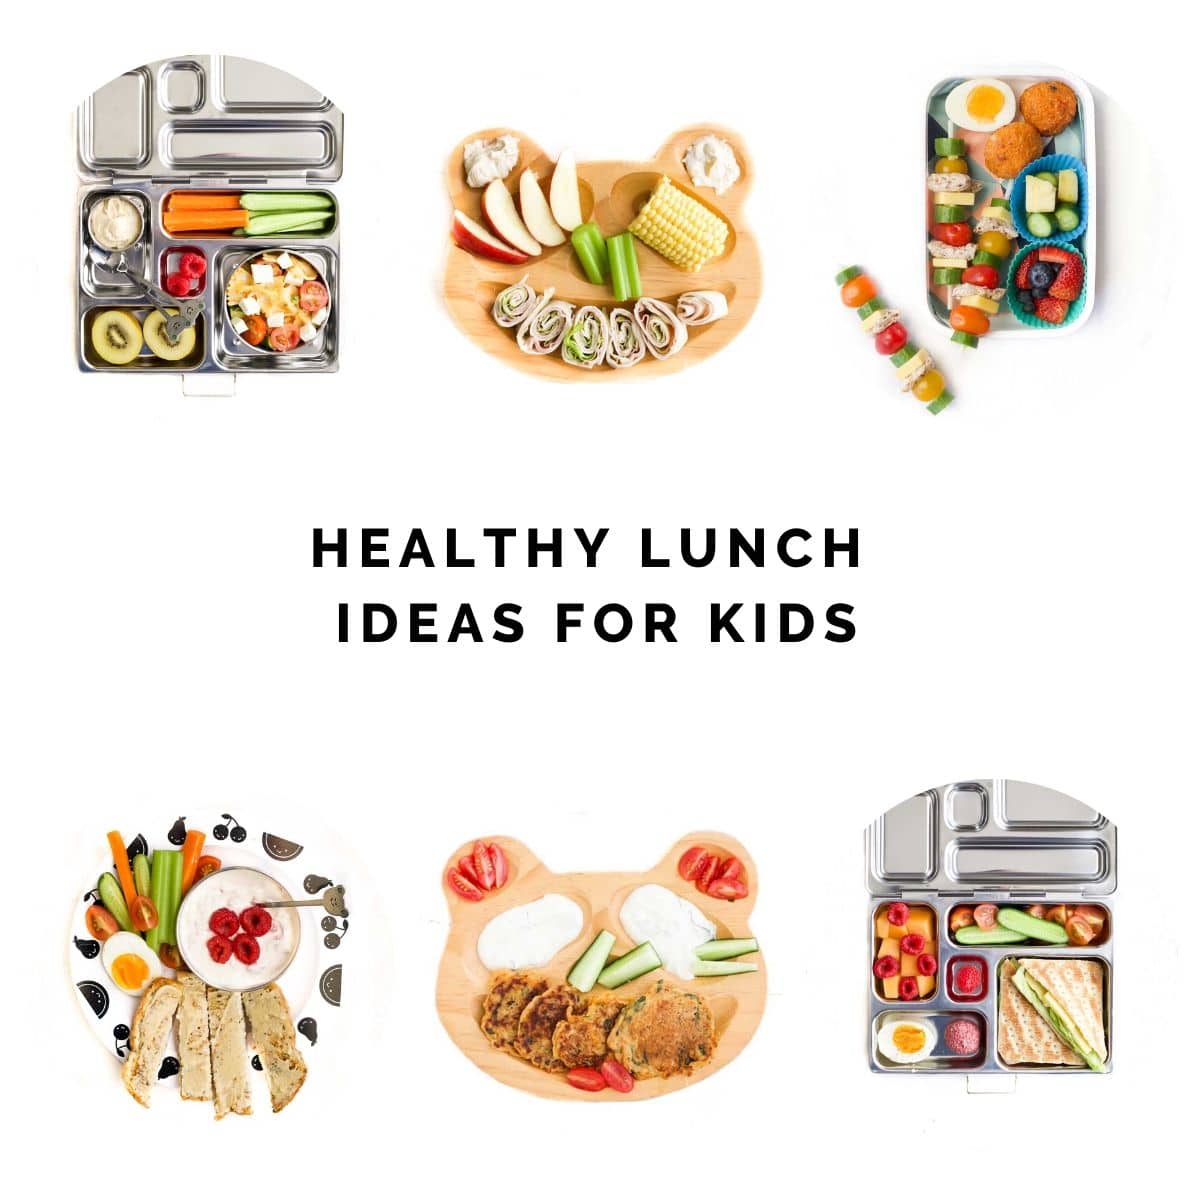 Healthy Lunch Ideas for Kids - Healthy Little Foodies